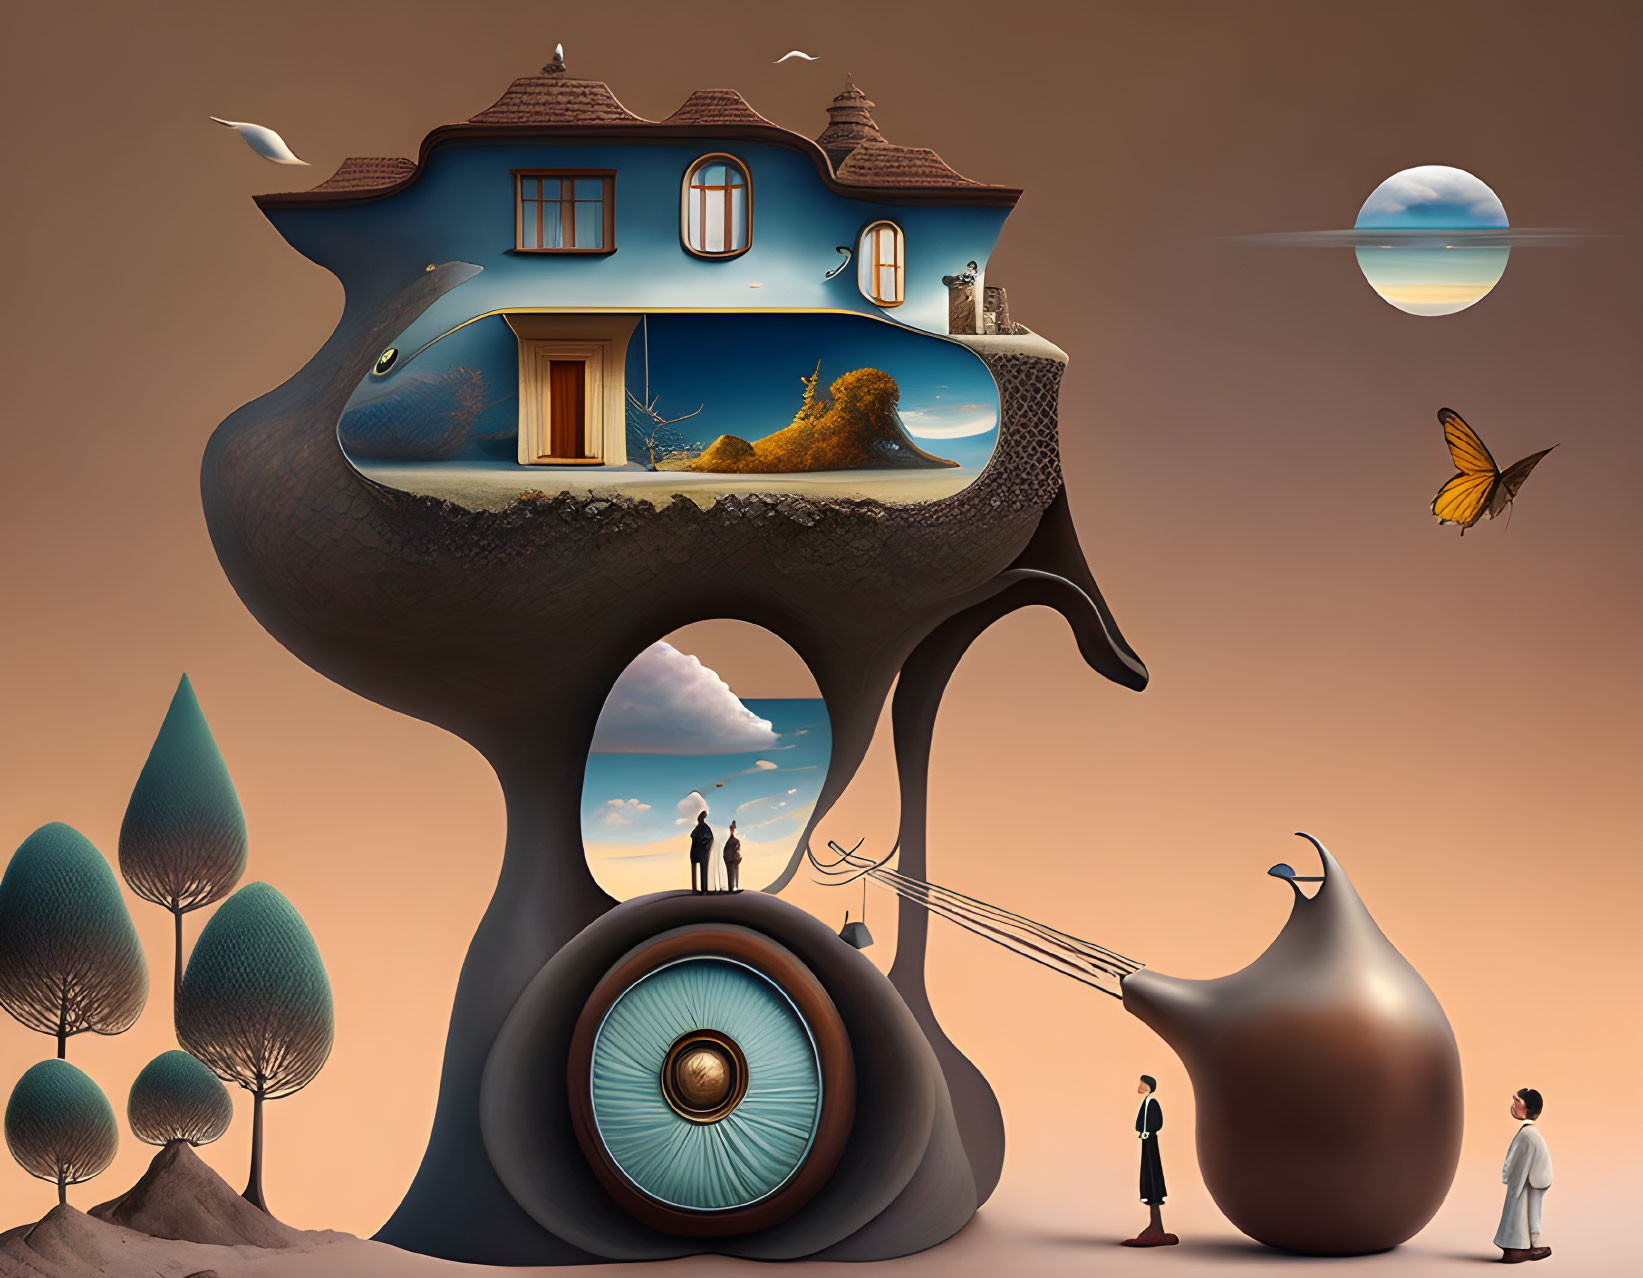 Surreal artwork: house on creature with human eye, oversized butterflies and trees